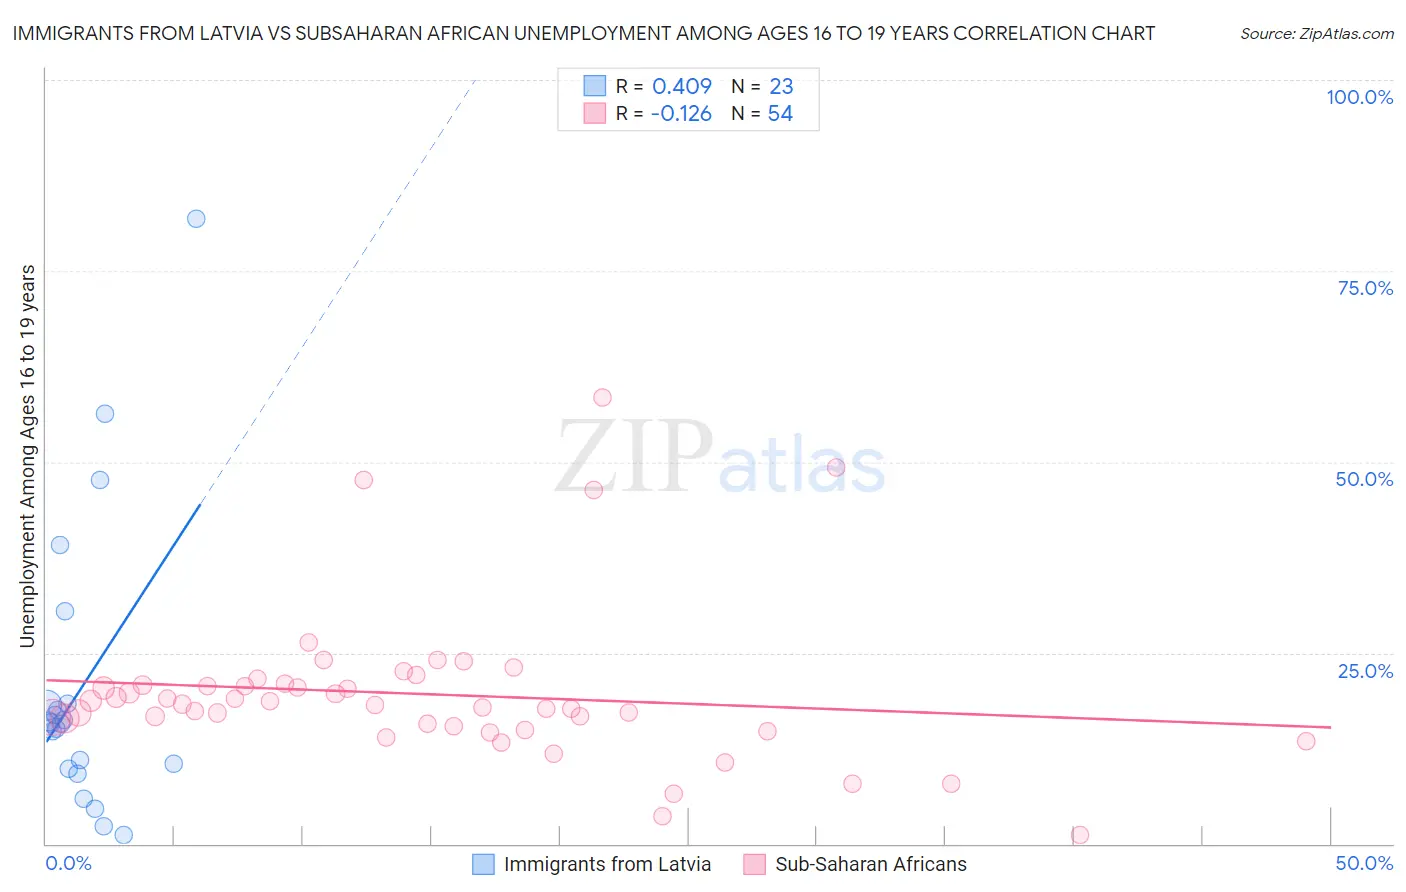 Immigrants from Latvia vs Subsaharan African Unemployment Among Ages 16 to 19 years